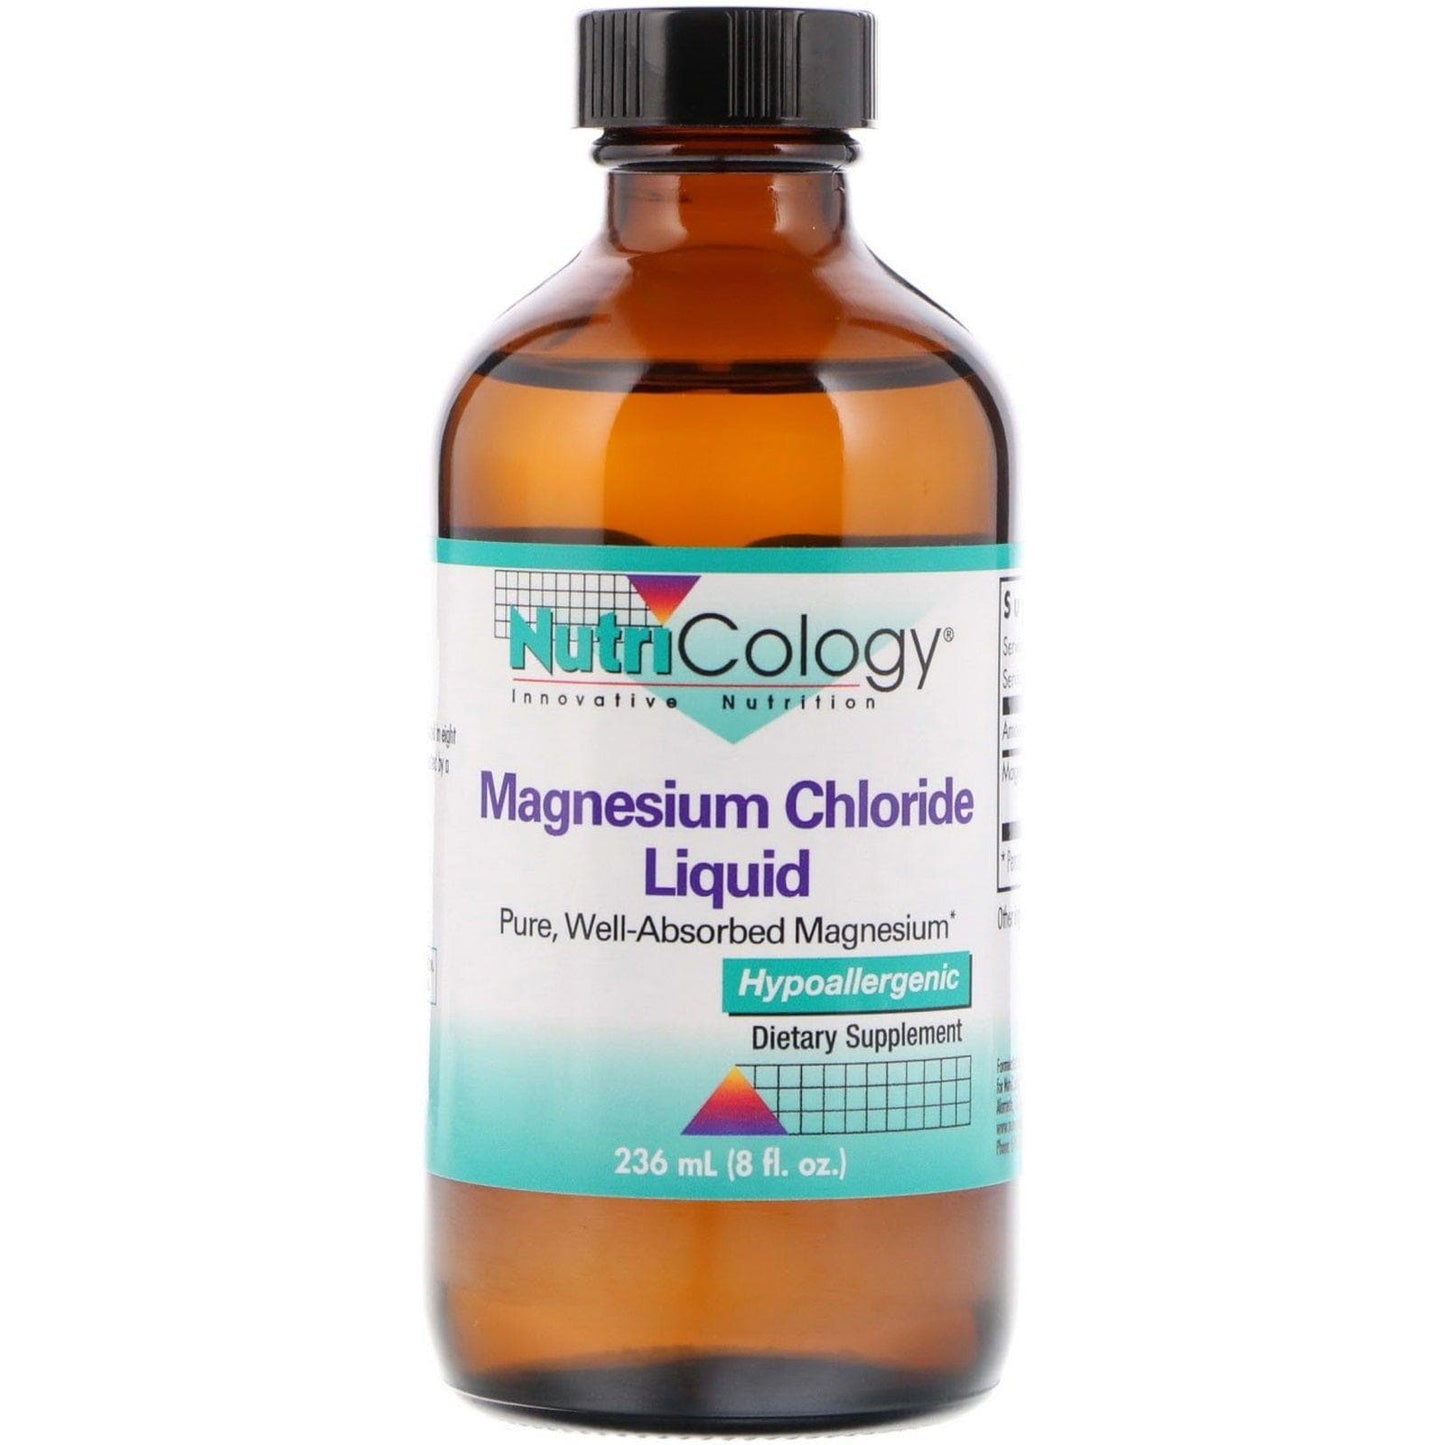 Magnesium Chloride Liquid, 236ml - Nutricology / Allergy Research Group - welzo